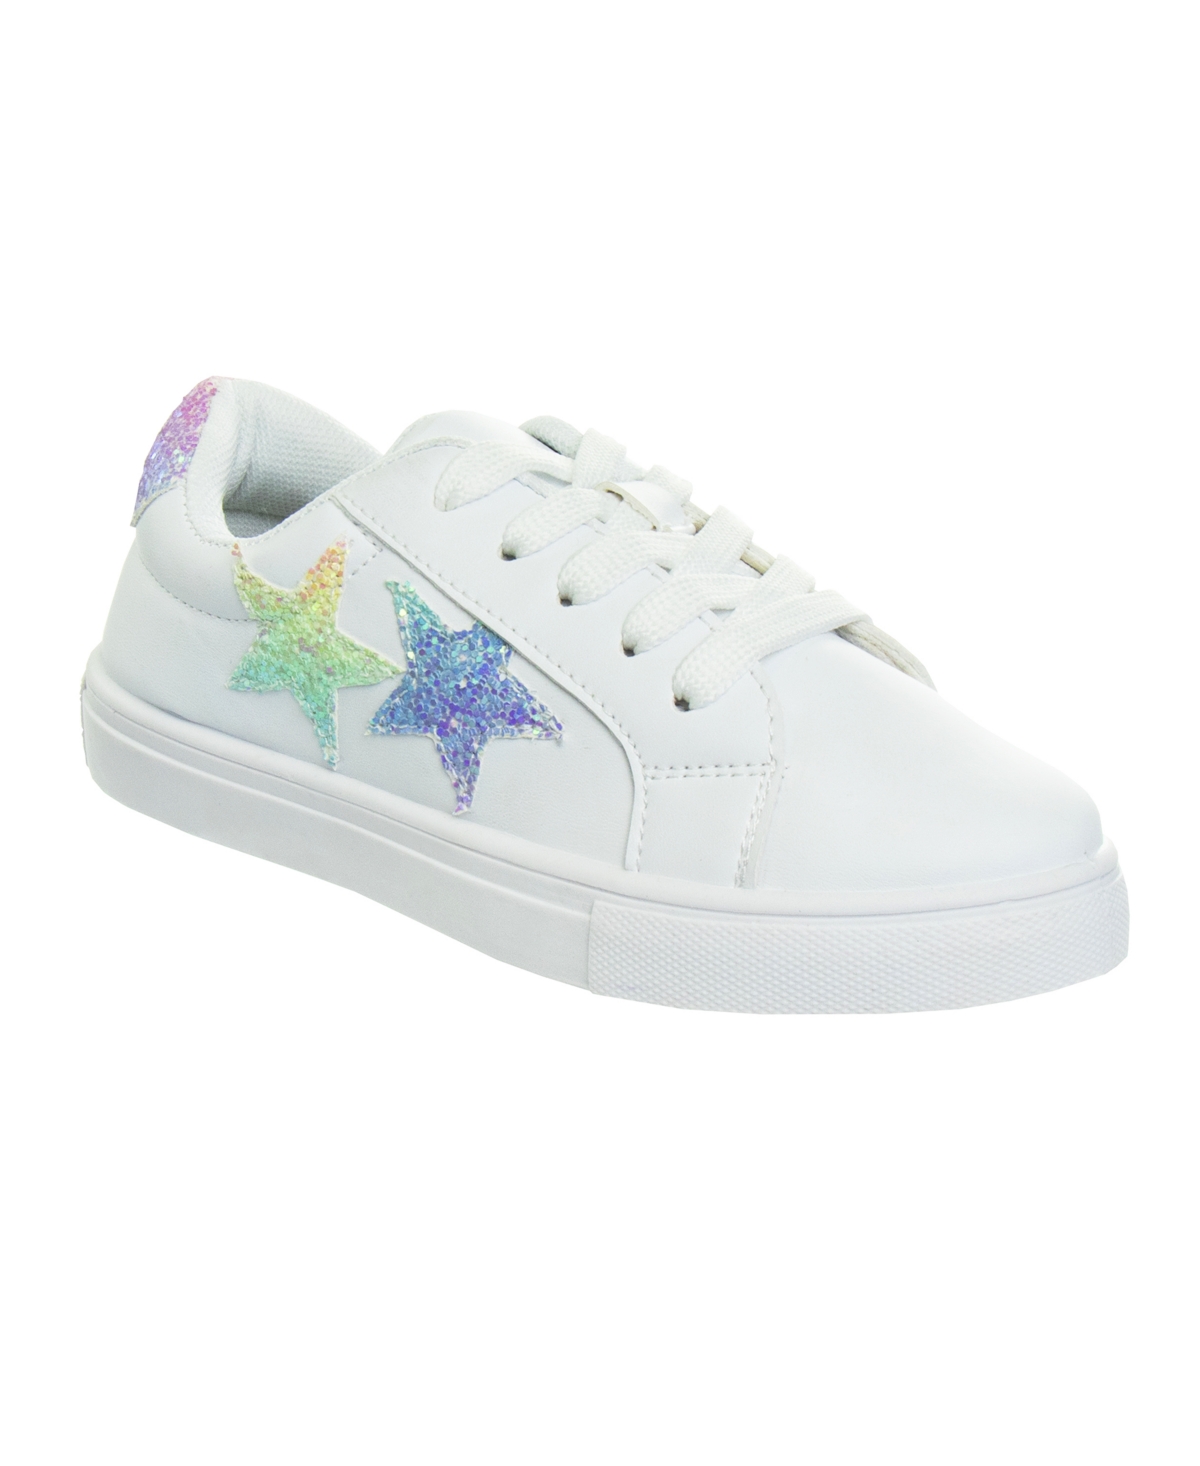 Kensie Girl Kids' Little Girls Lace Up Glittery Casual Sneakers In White